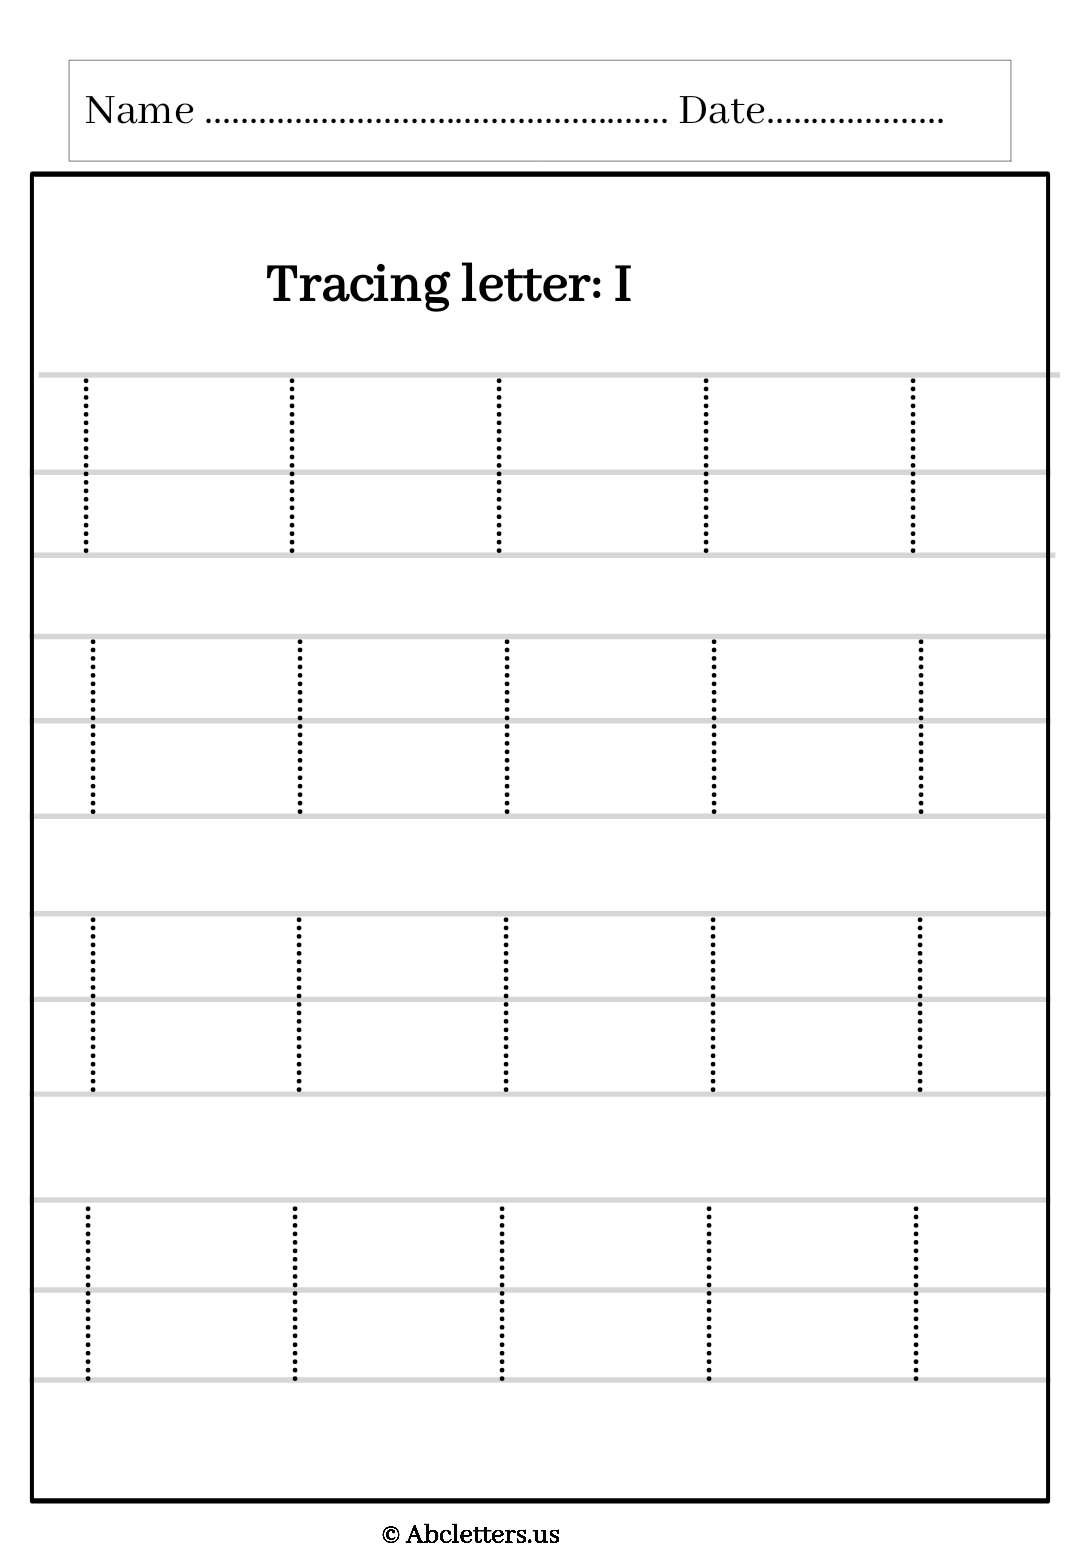 Tracing letter uppercase I With 3 lines